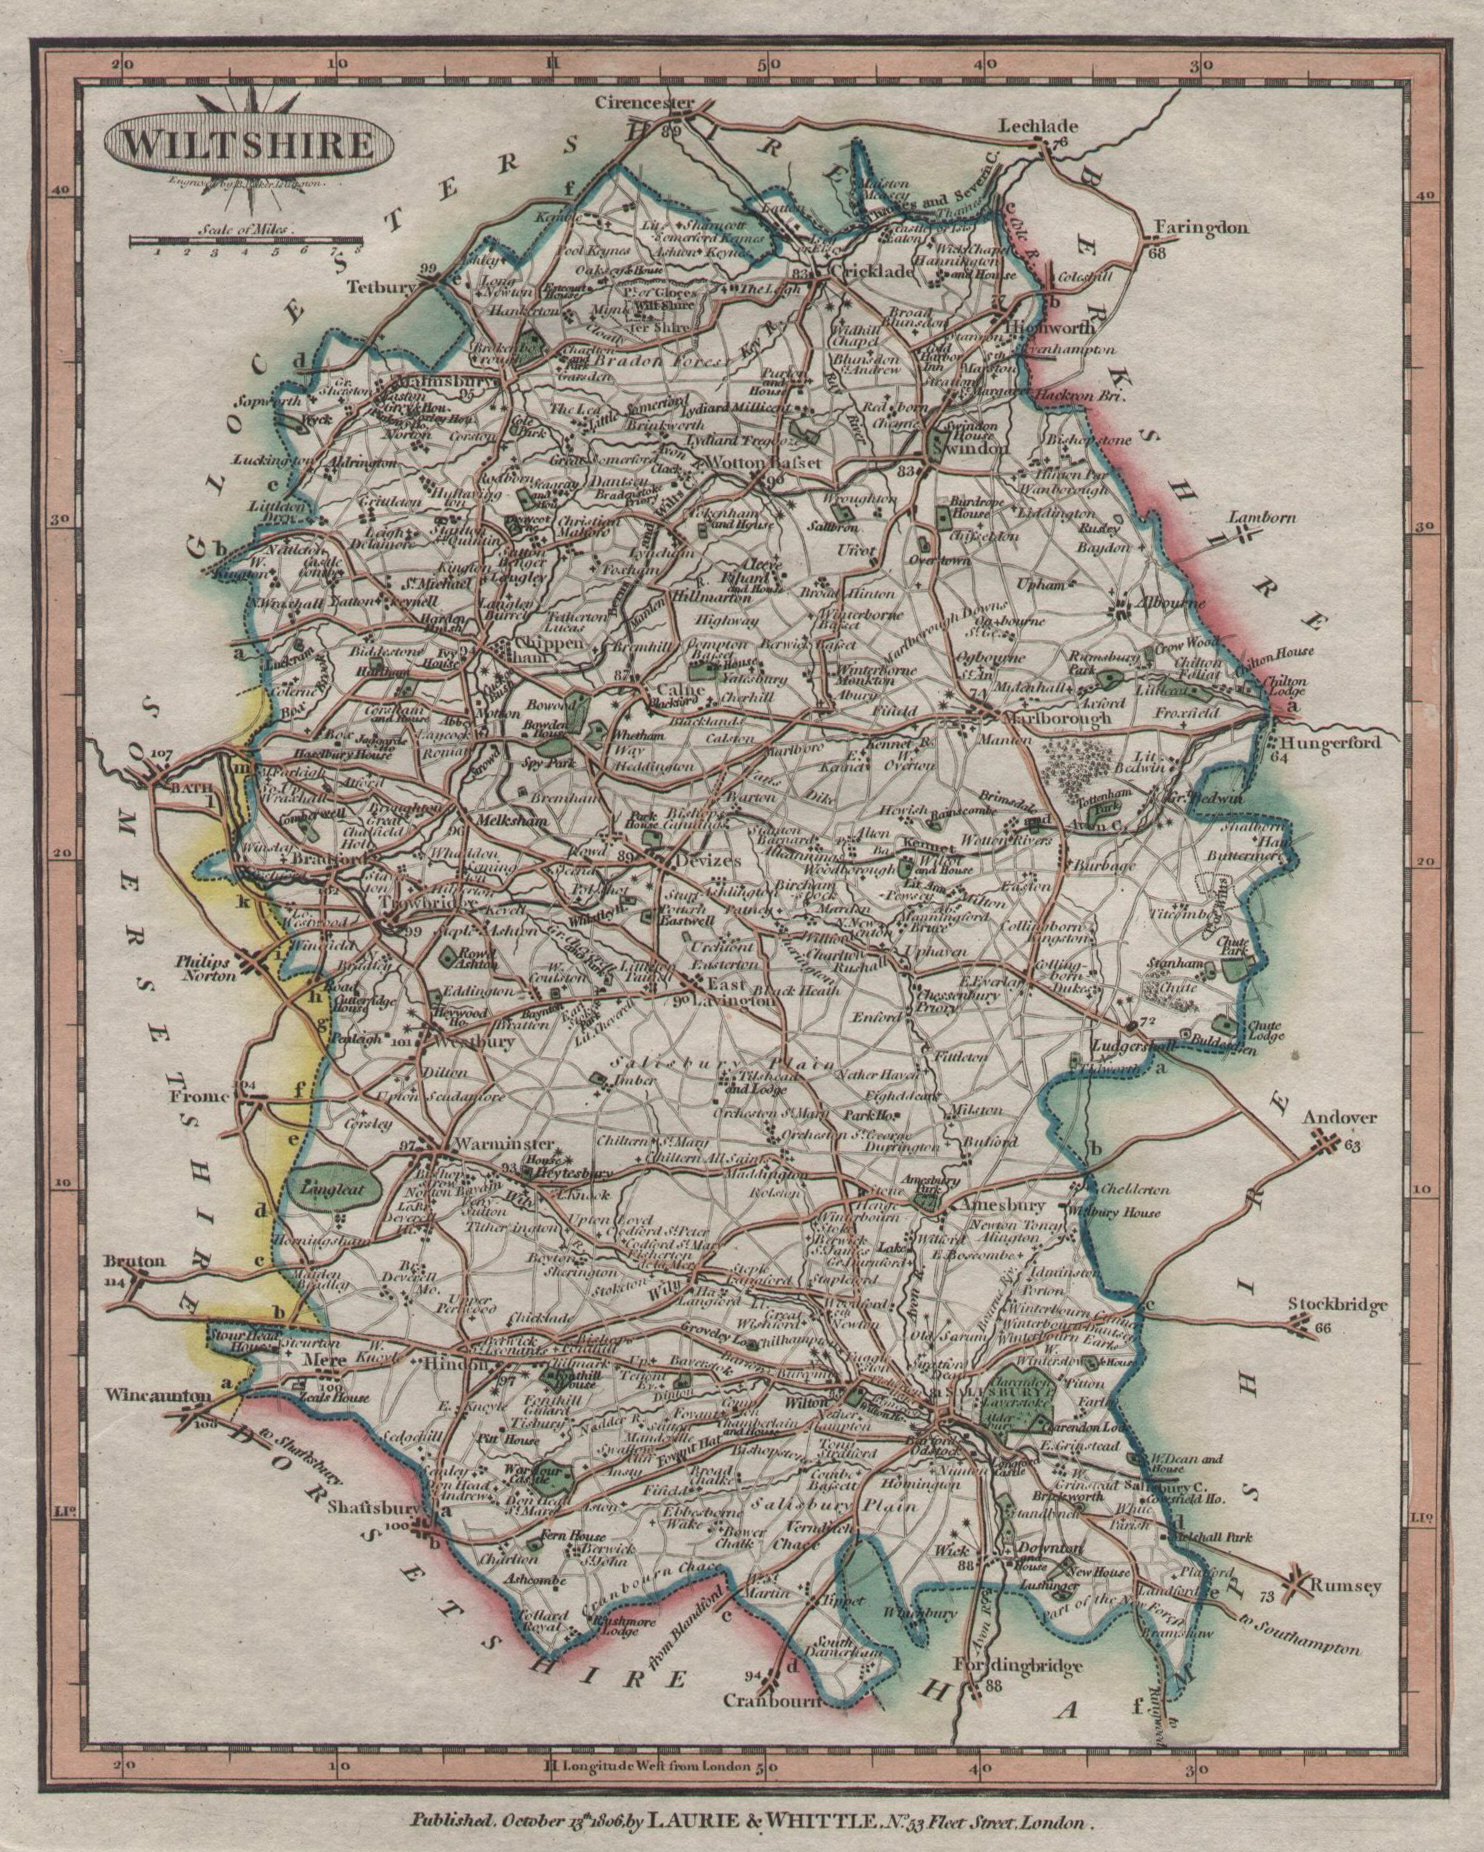 Map of Wiltshire - Baker-Laurie & Whittle